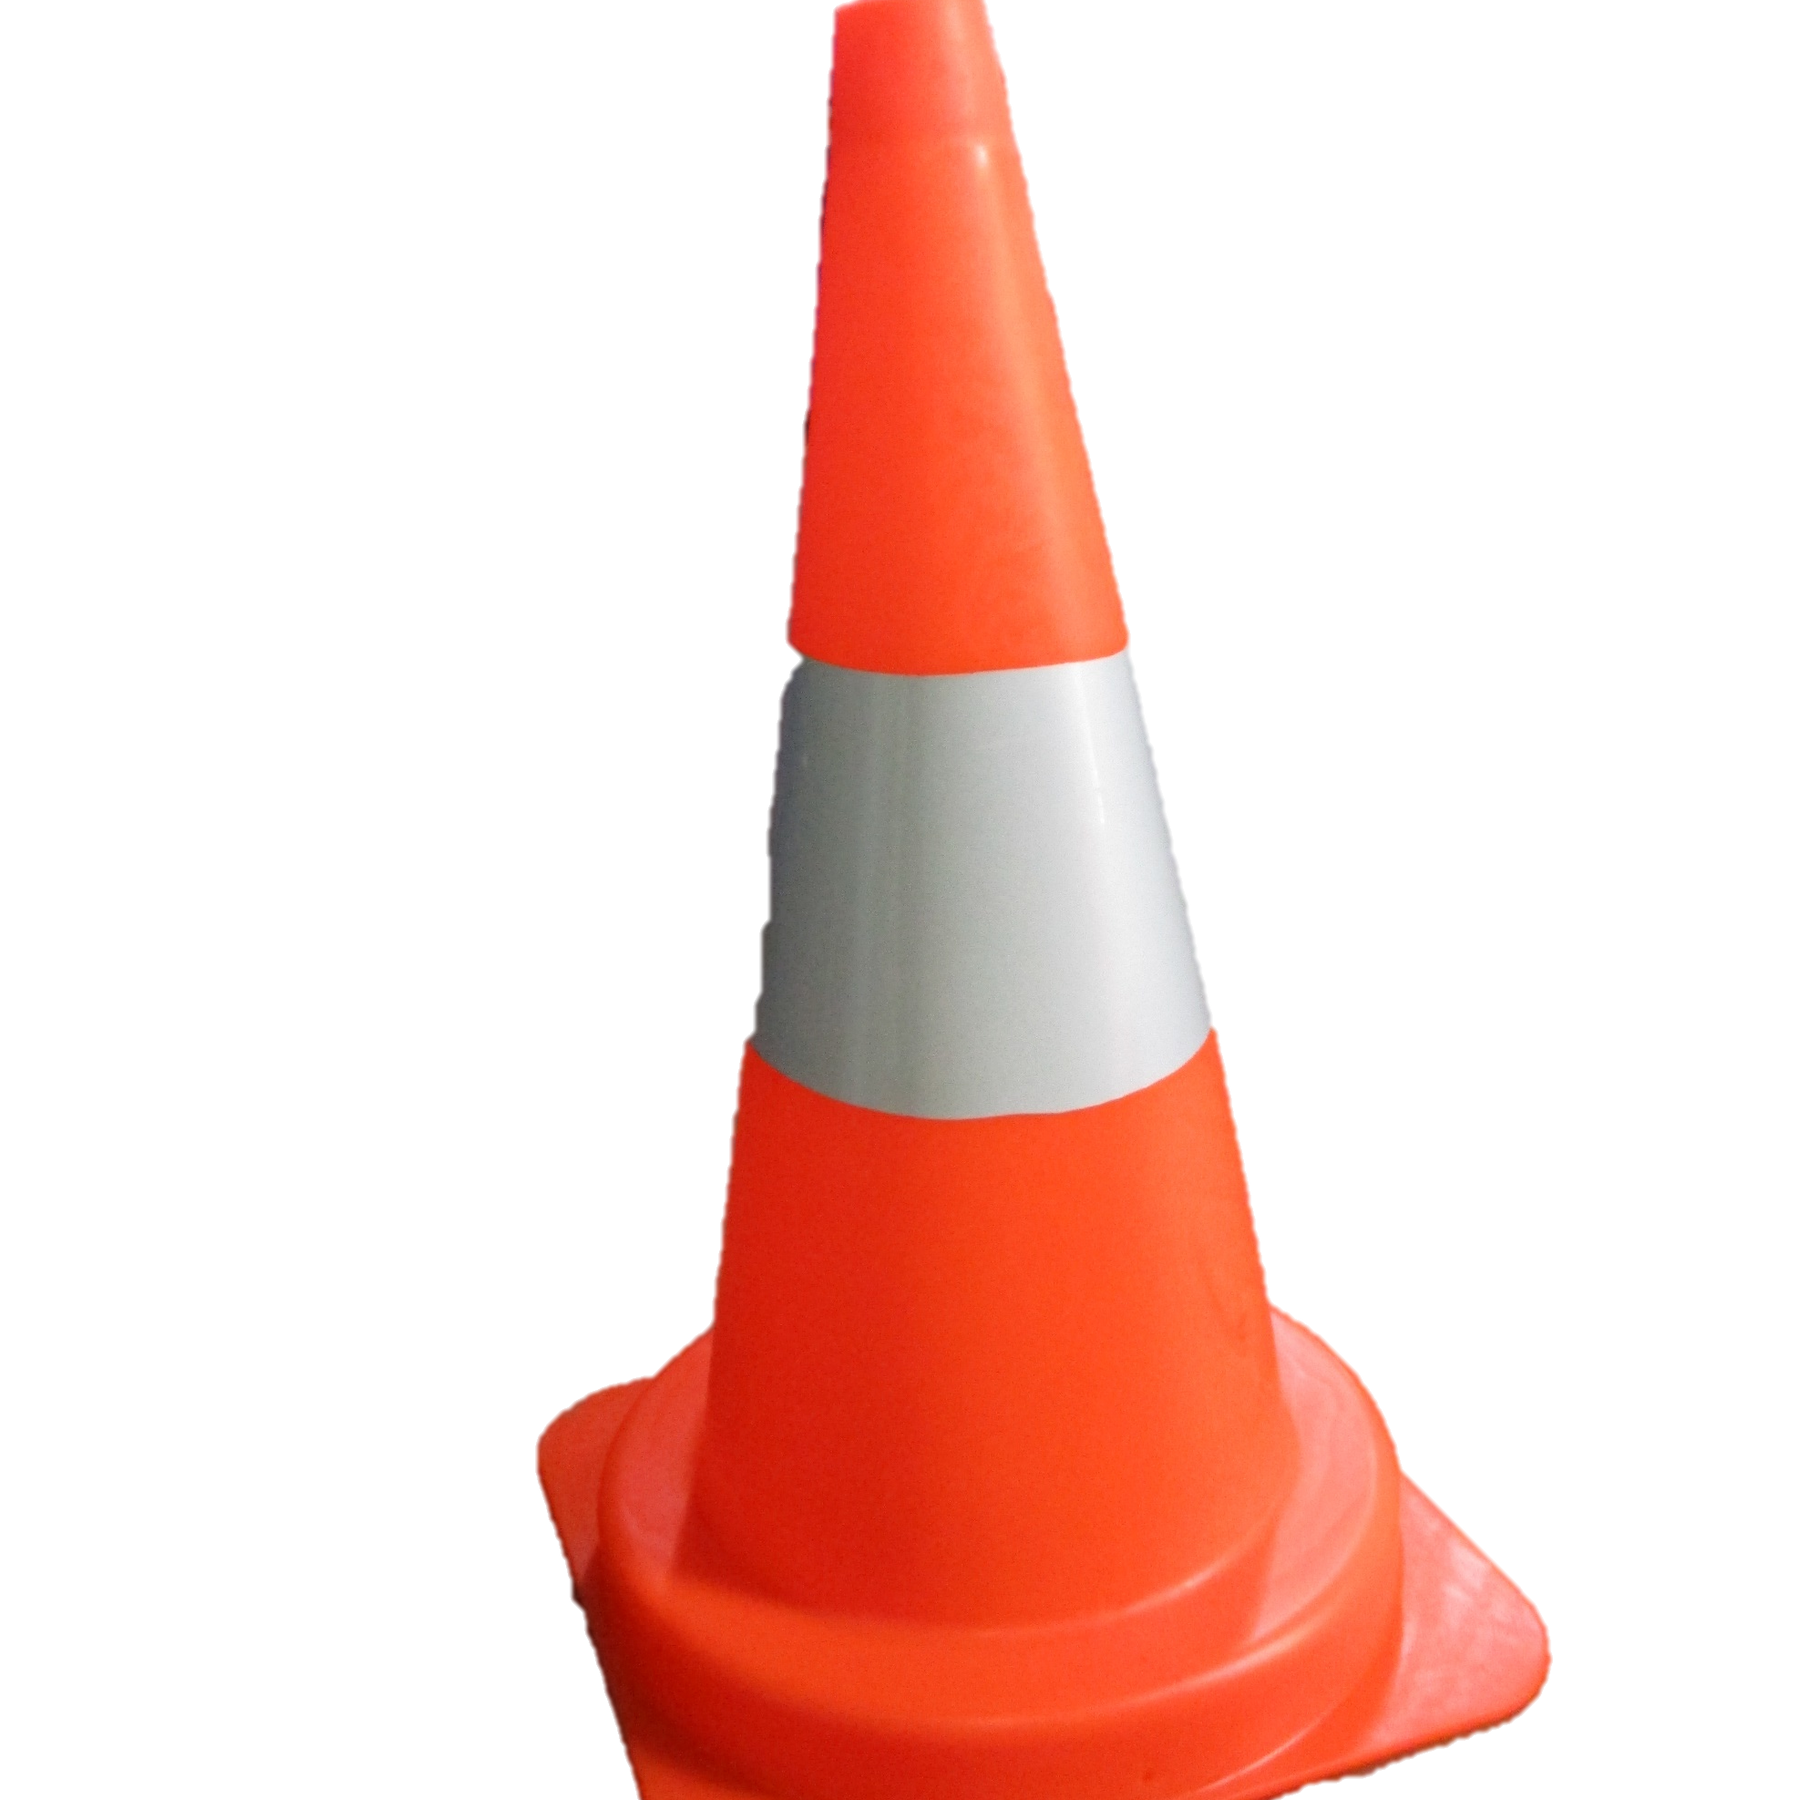 Traffic Cones 101: What Are They and How Do I Use Them?